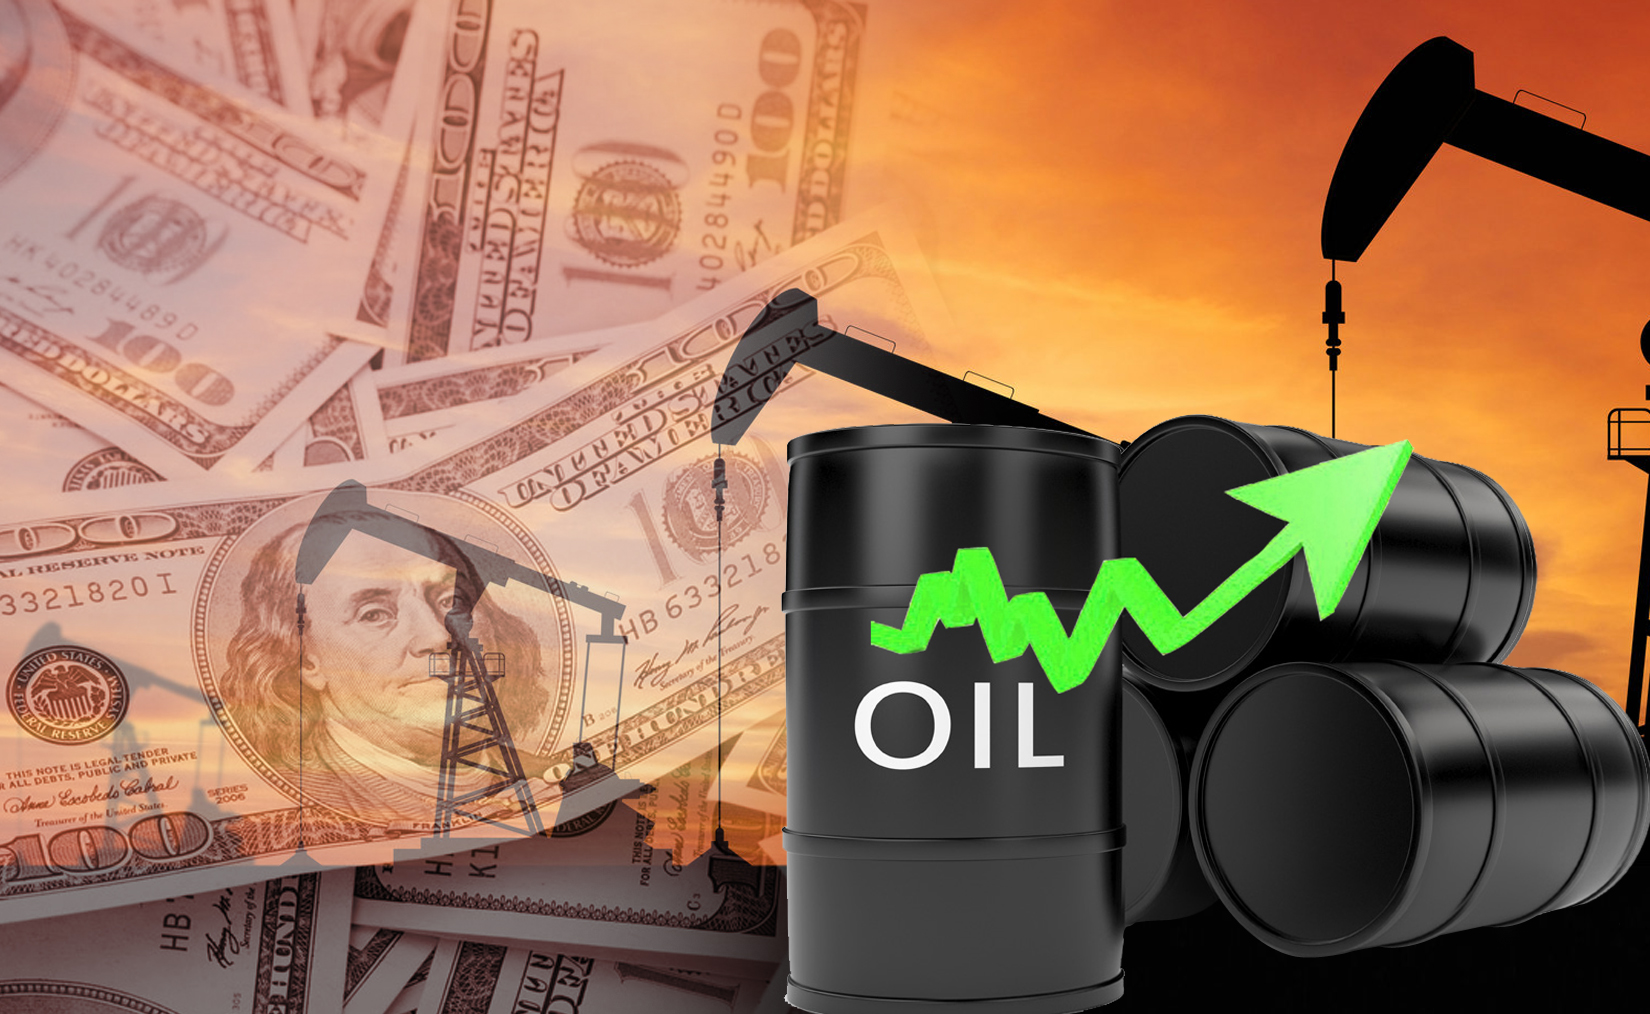 Kuwait oil price up 47 cents to USD 47.76 pb                                                                                                                                                                                                              